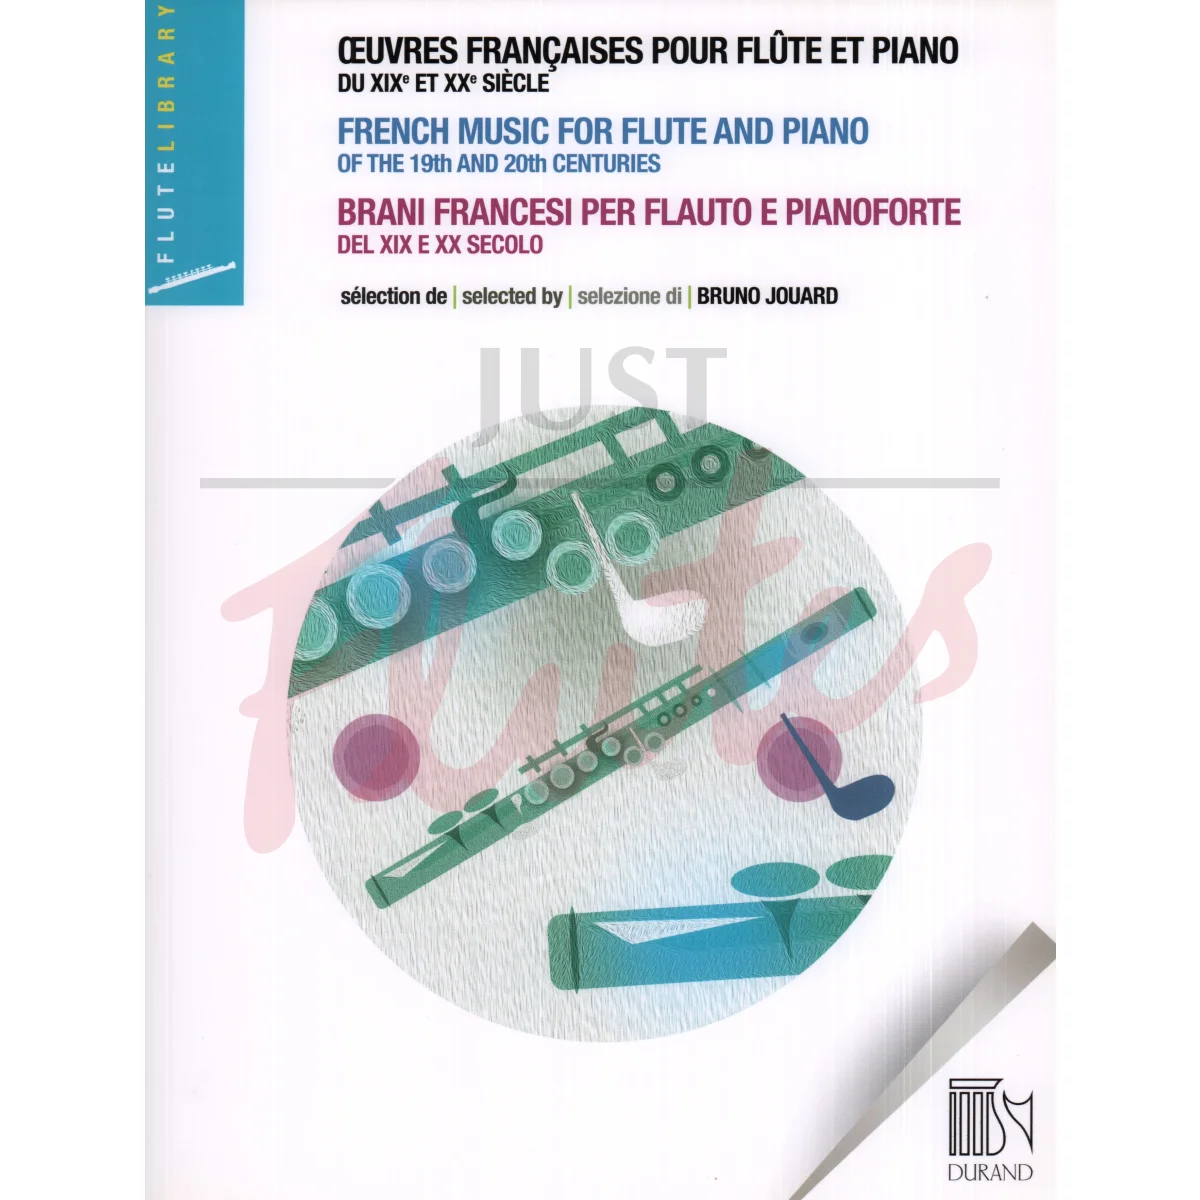 French Music of the 19th and 20th Centuries for Flute and Piano